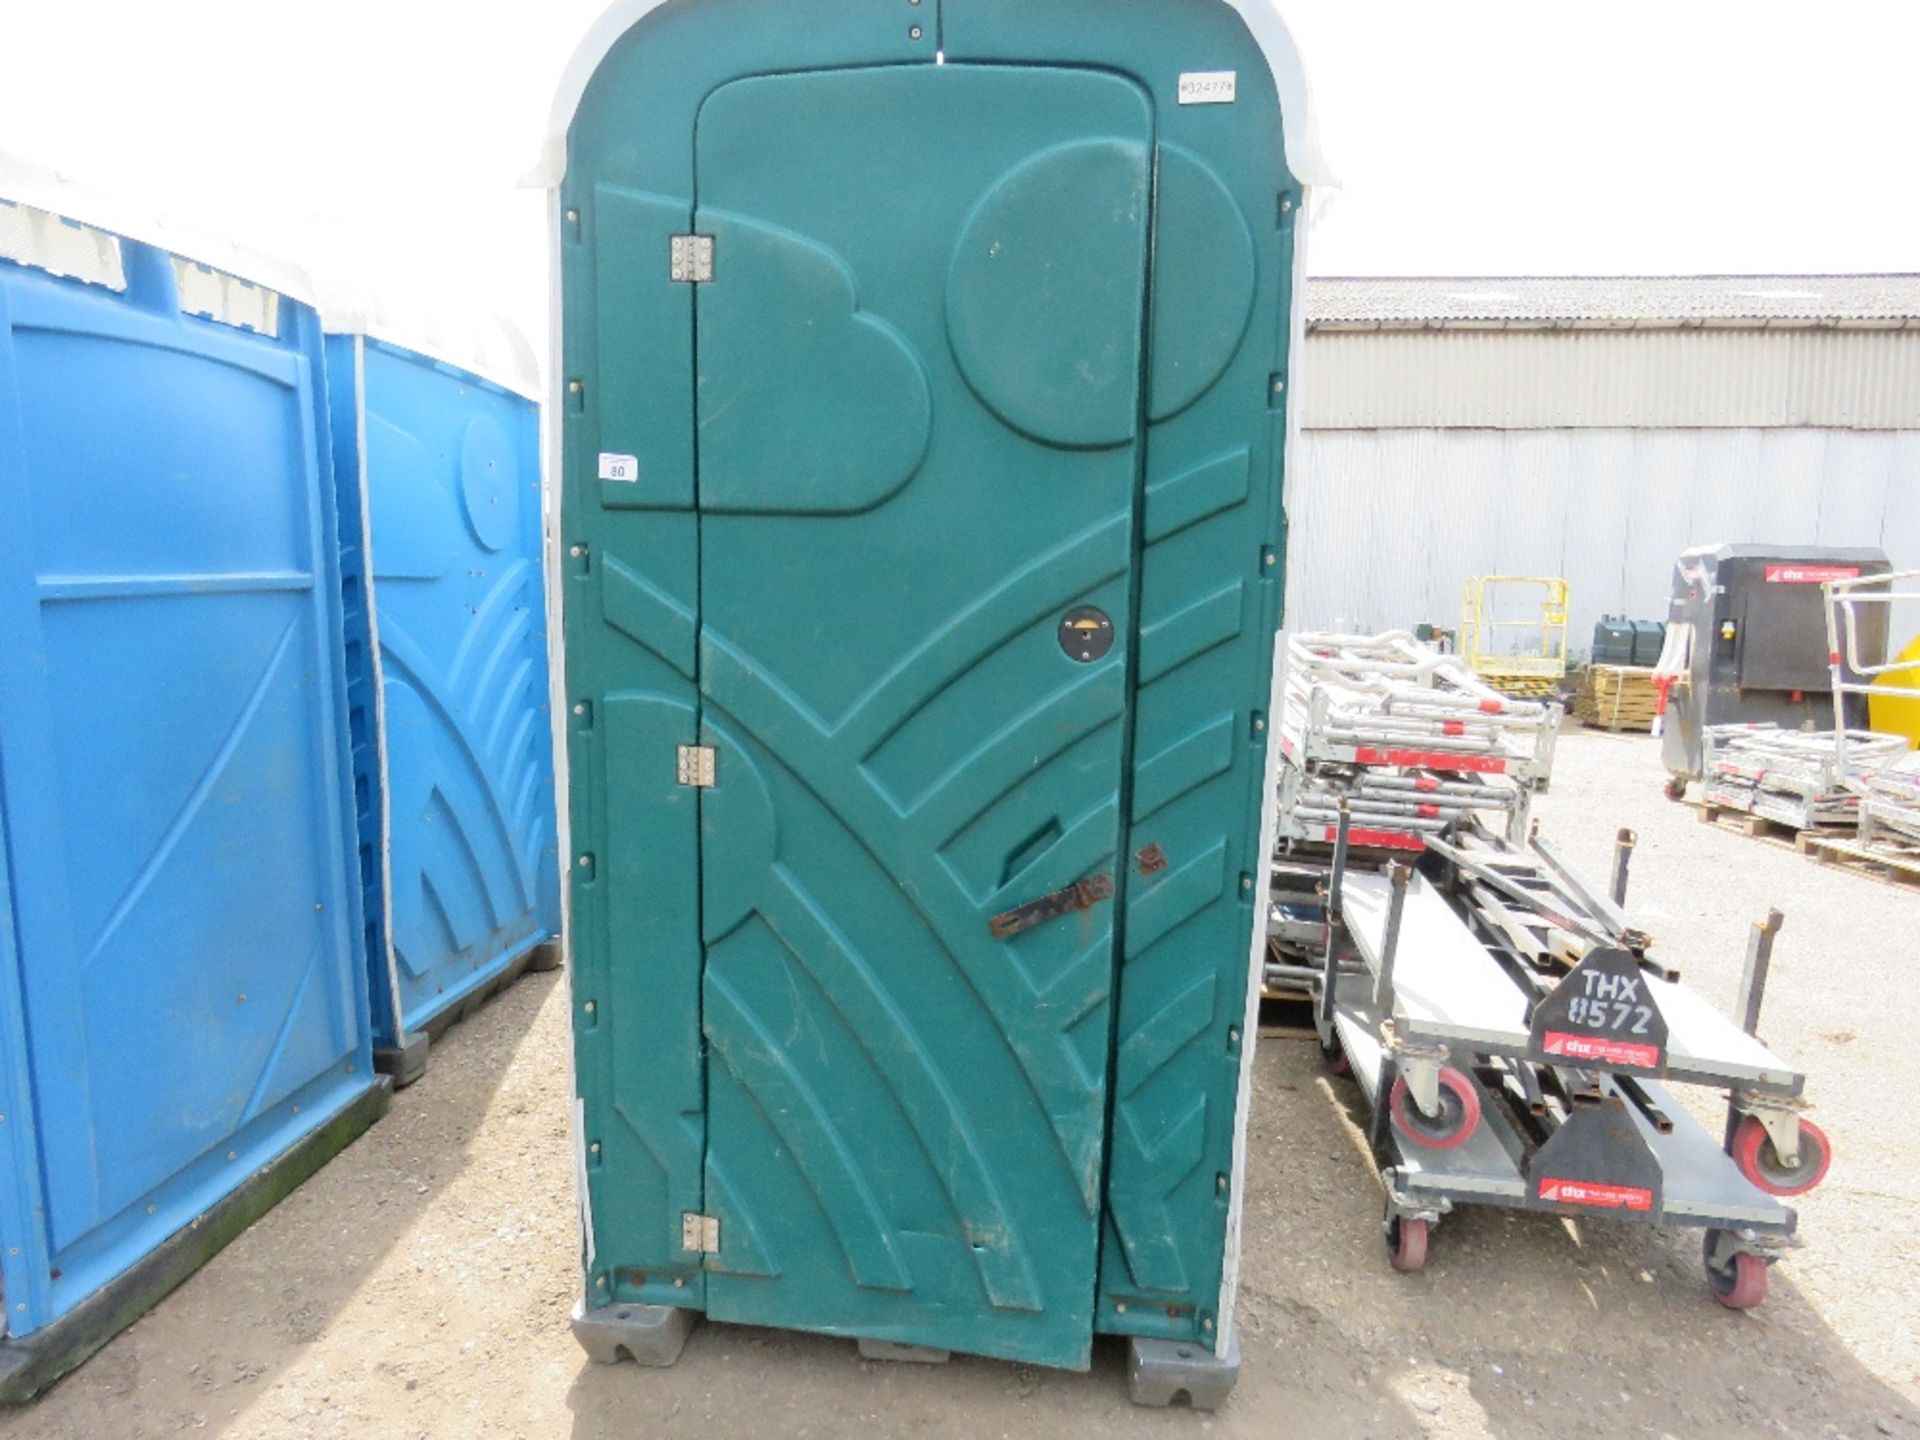 PORTABLE SITE / EVENTS TOILET, DIRECT FROM EVENTS COMPANY DUE TO ONGOING REPLACEMENT PRGRAMME. - Image 2 of 4